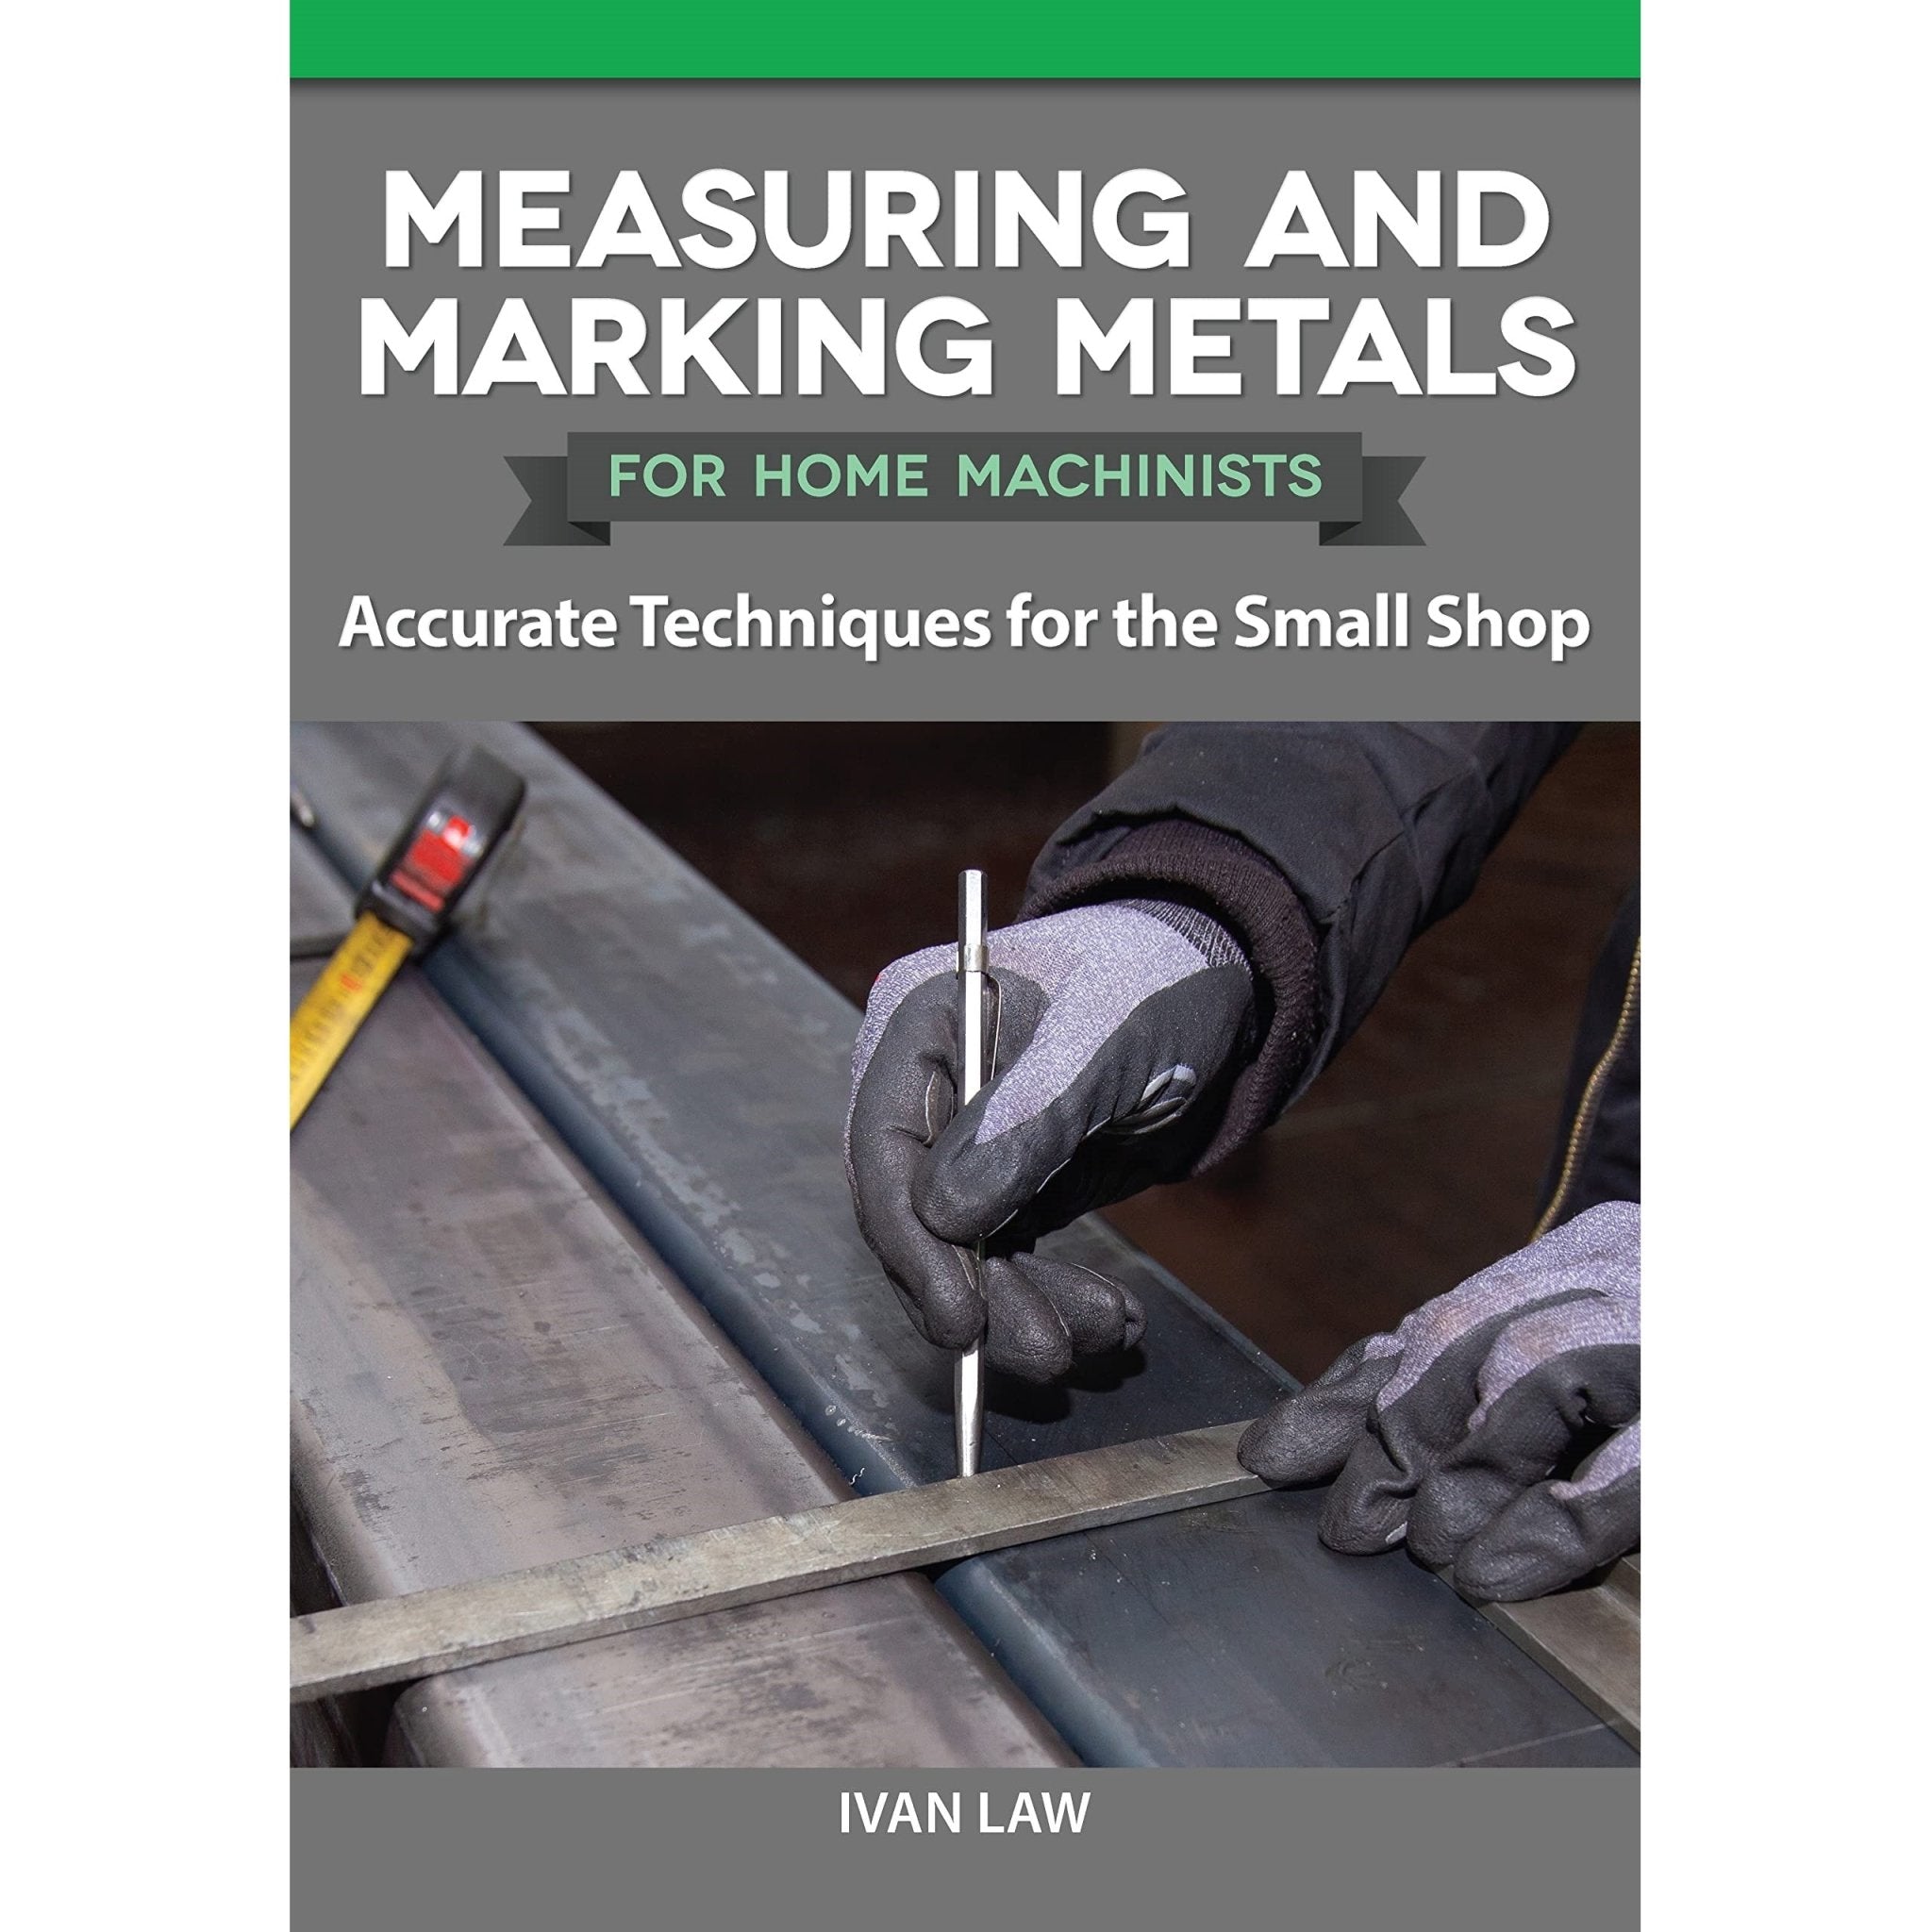 Spindles for Small Shop Metalworkers Book